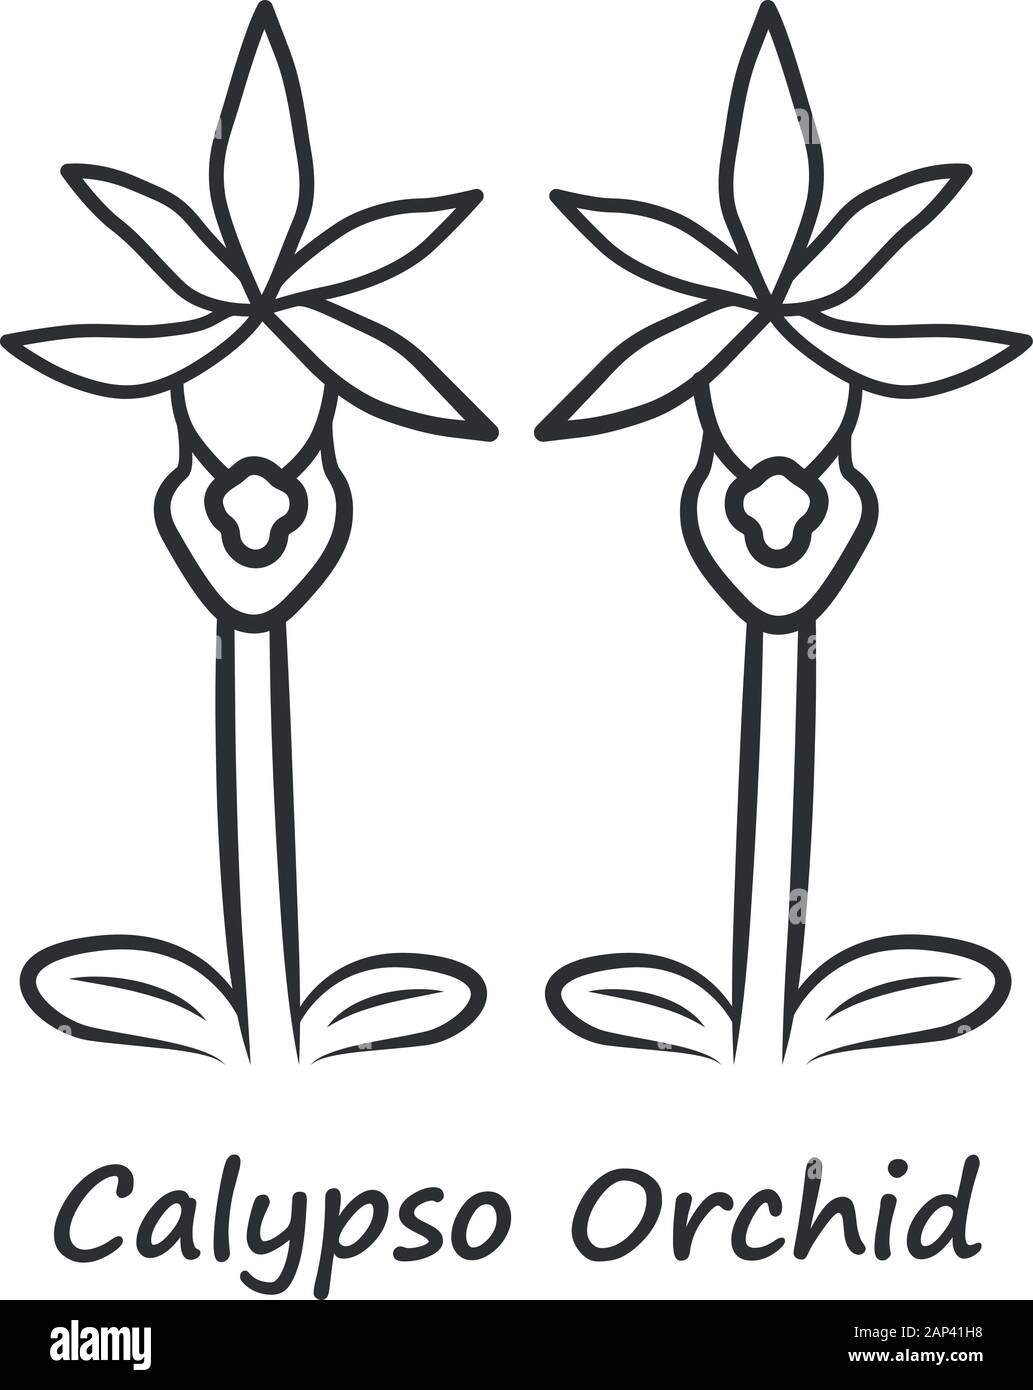 Calypso orchid linear icon. Thin line illustration. Exotic, tropical blooming flower. Fairy slipper with name. Calypso bulbosa. Wildflower paphiopedil Stock Vector